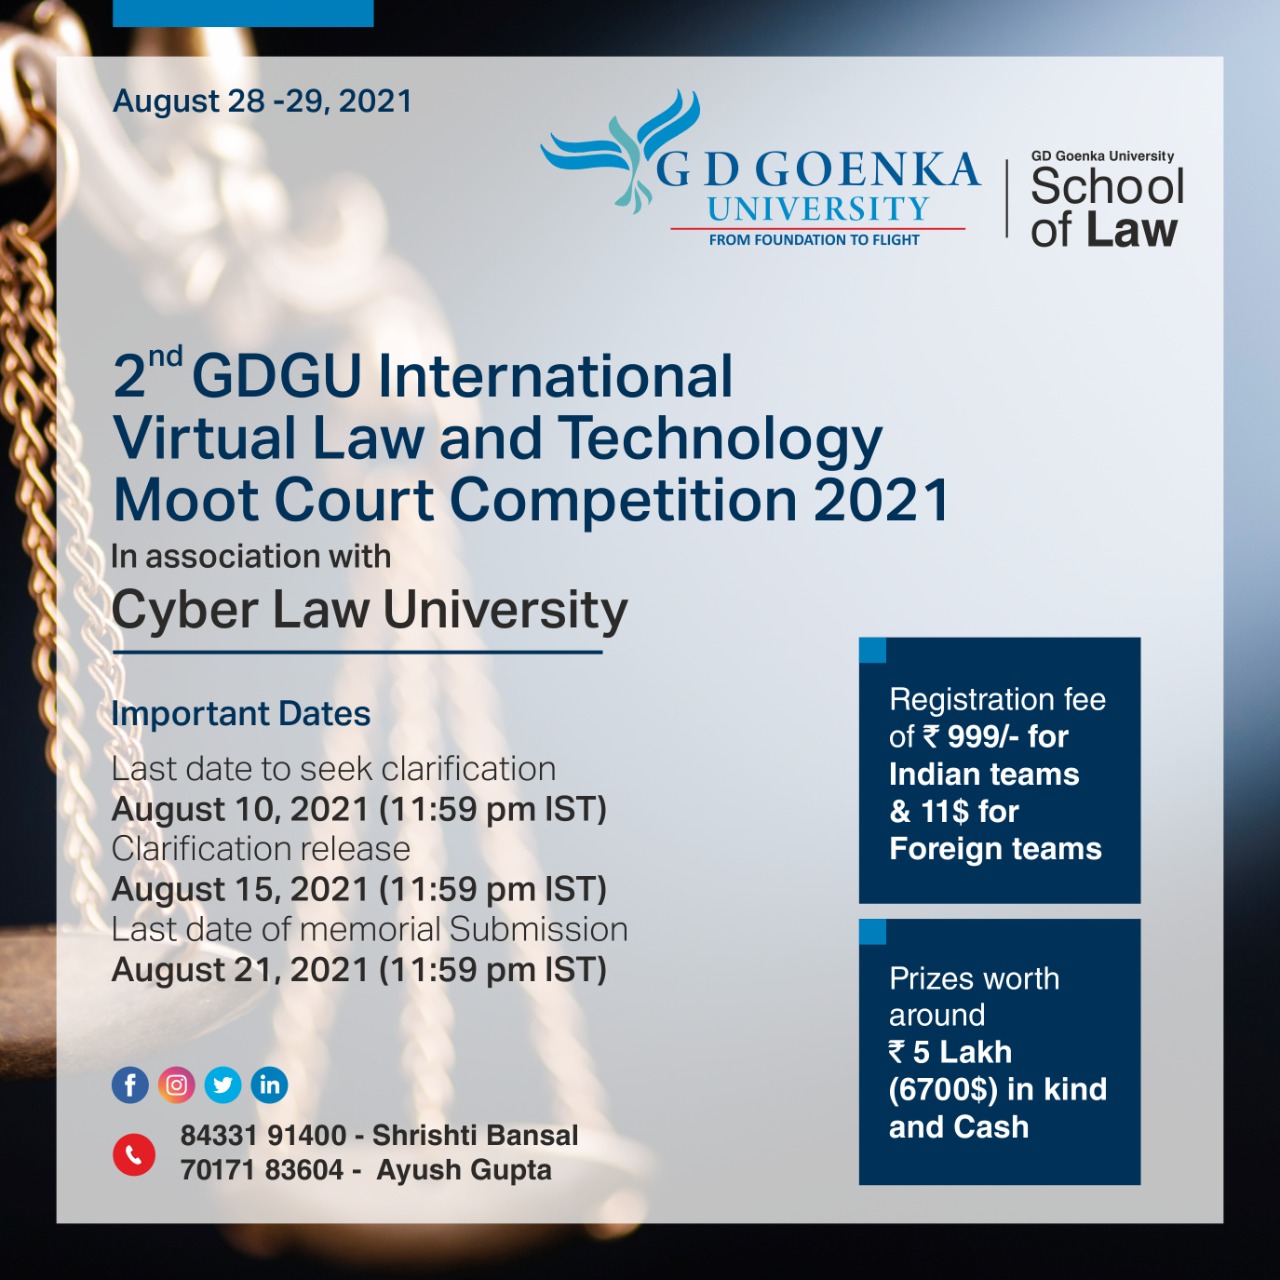 2nd GDGU International Virtual Law and Technology Moot Court Competition 2021 in association with Cyber Law University